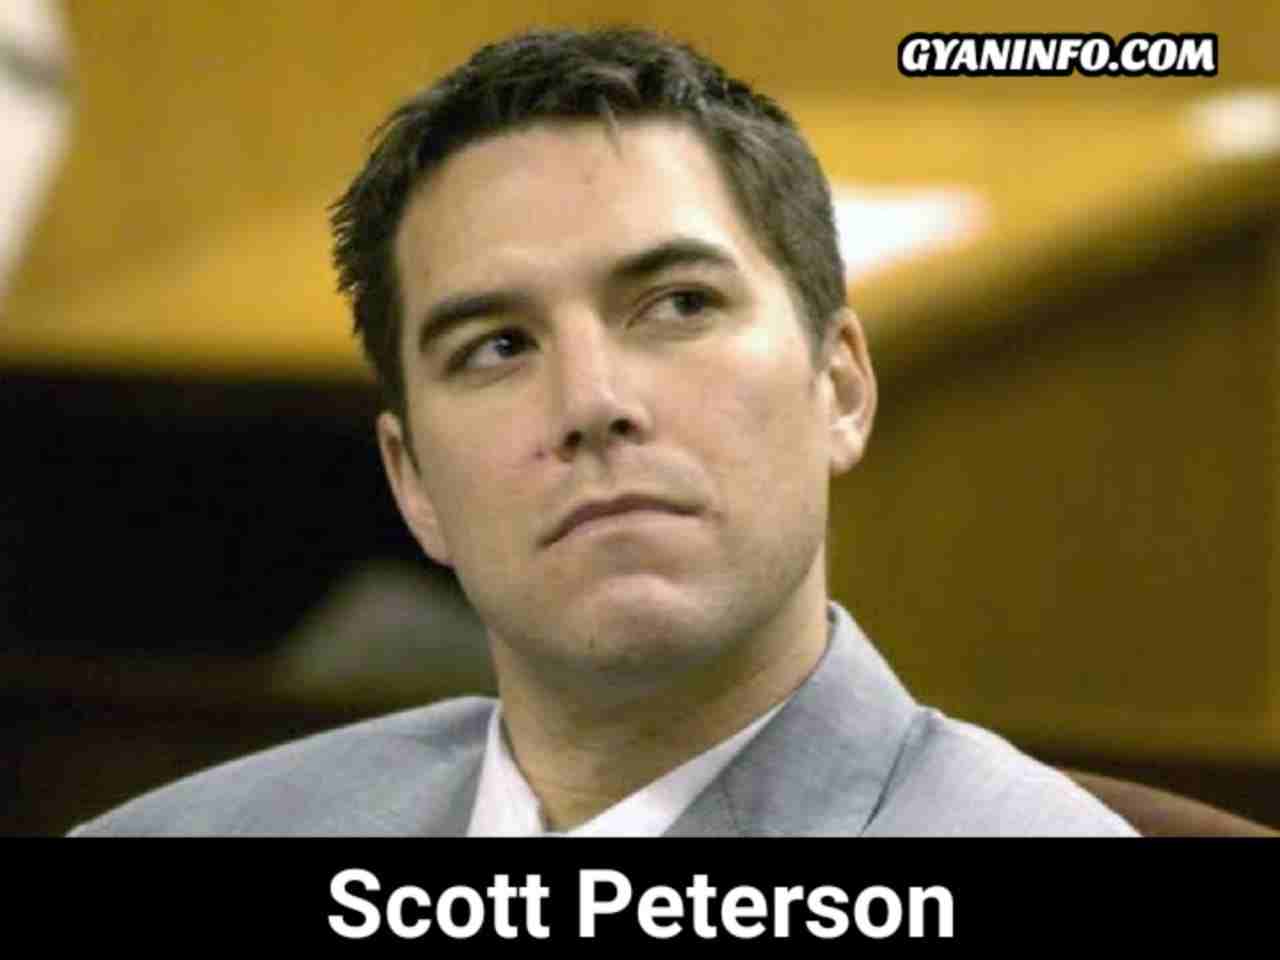 Scott Peterson Biography, Wiki, Age, Height, Wife, Career, Net Worth & More